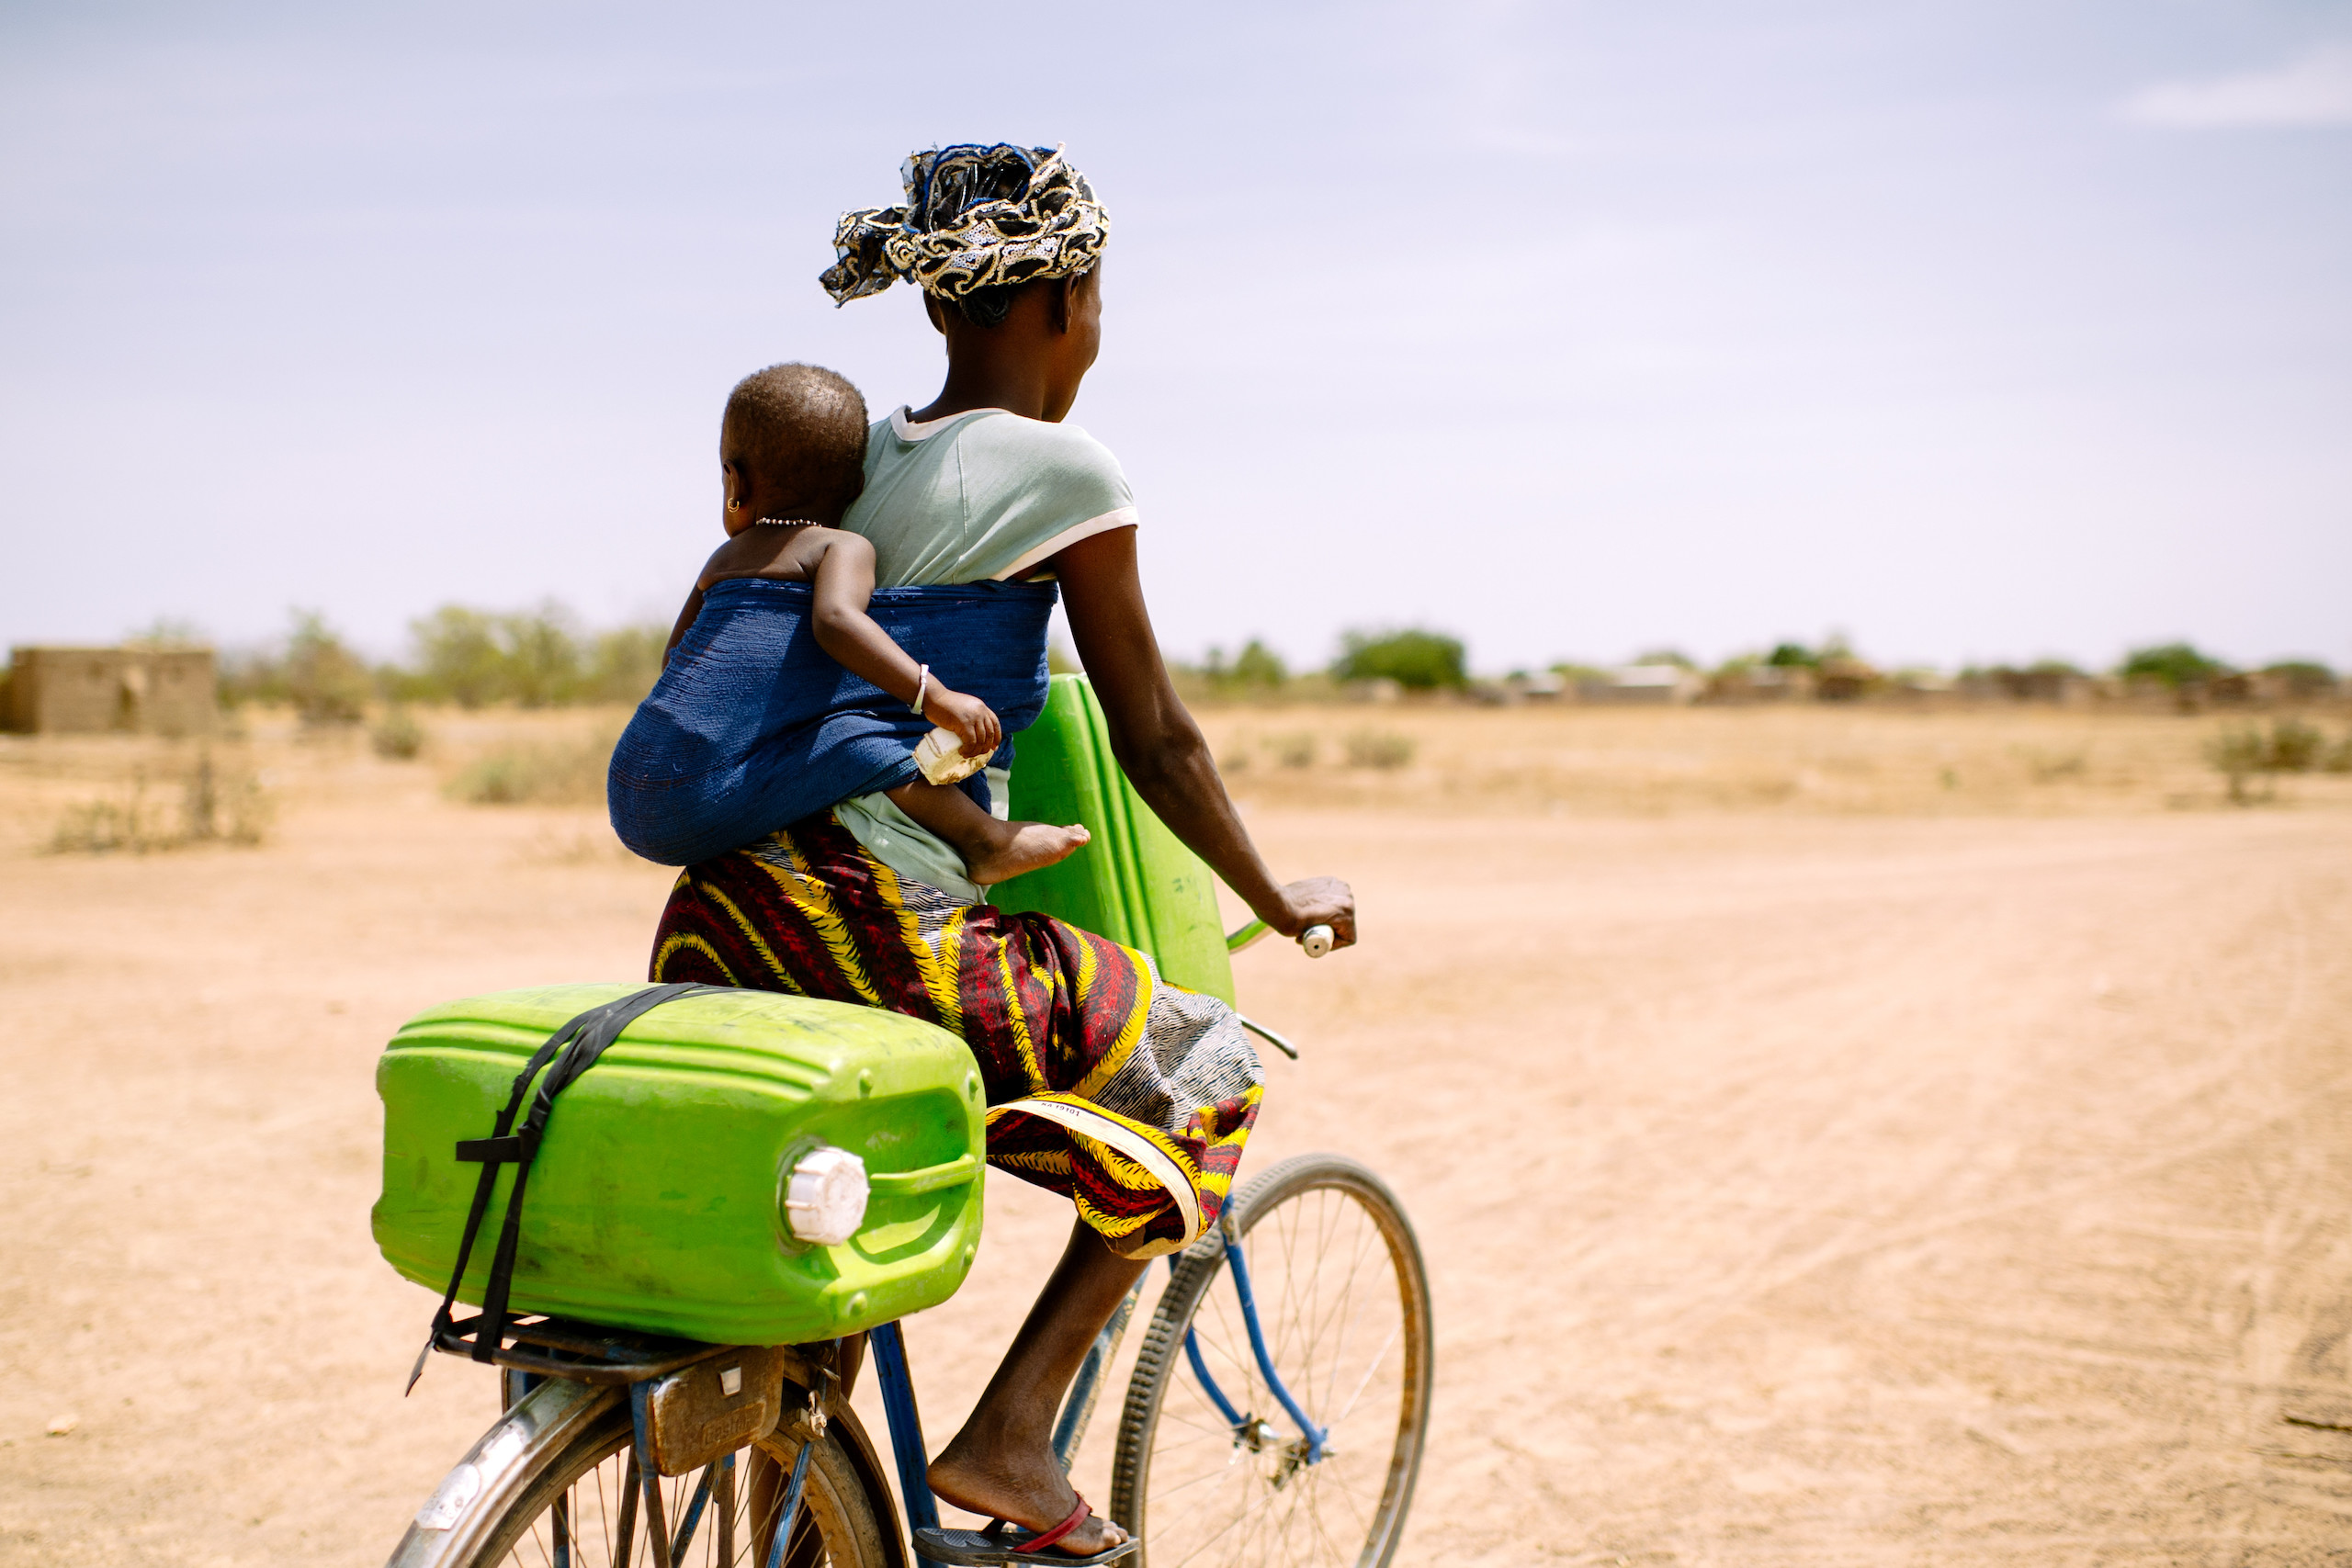 A woman rides her bicycle with her baby to collect water for her family, Sorobouly village near Boromo, Burkina Faso.